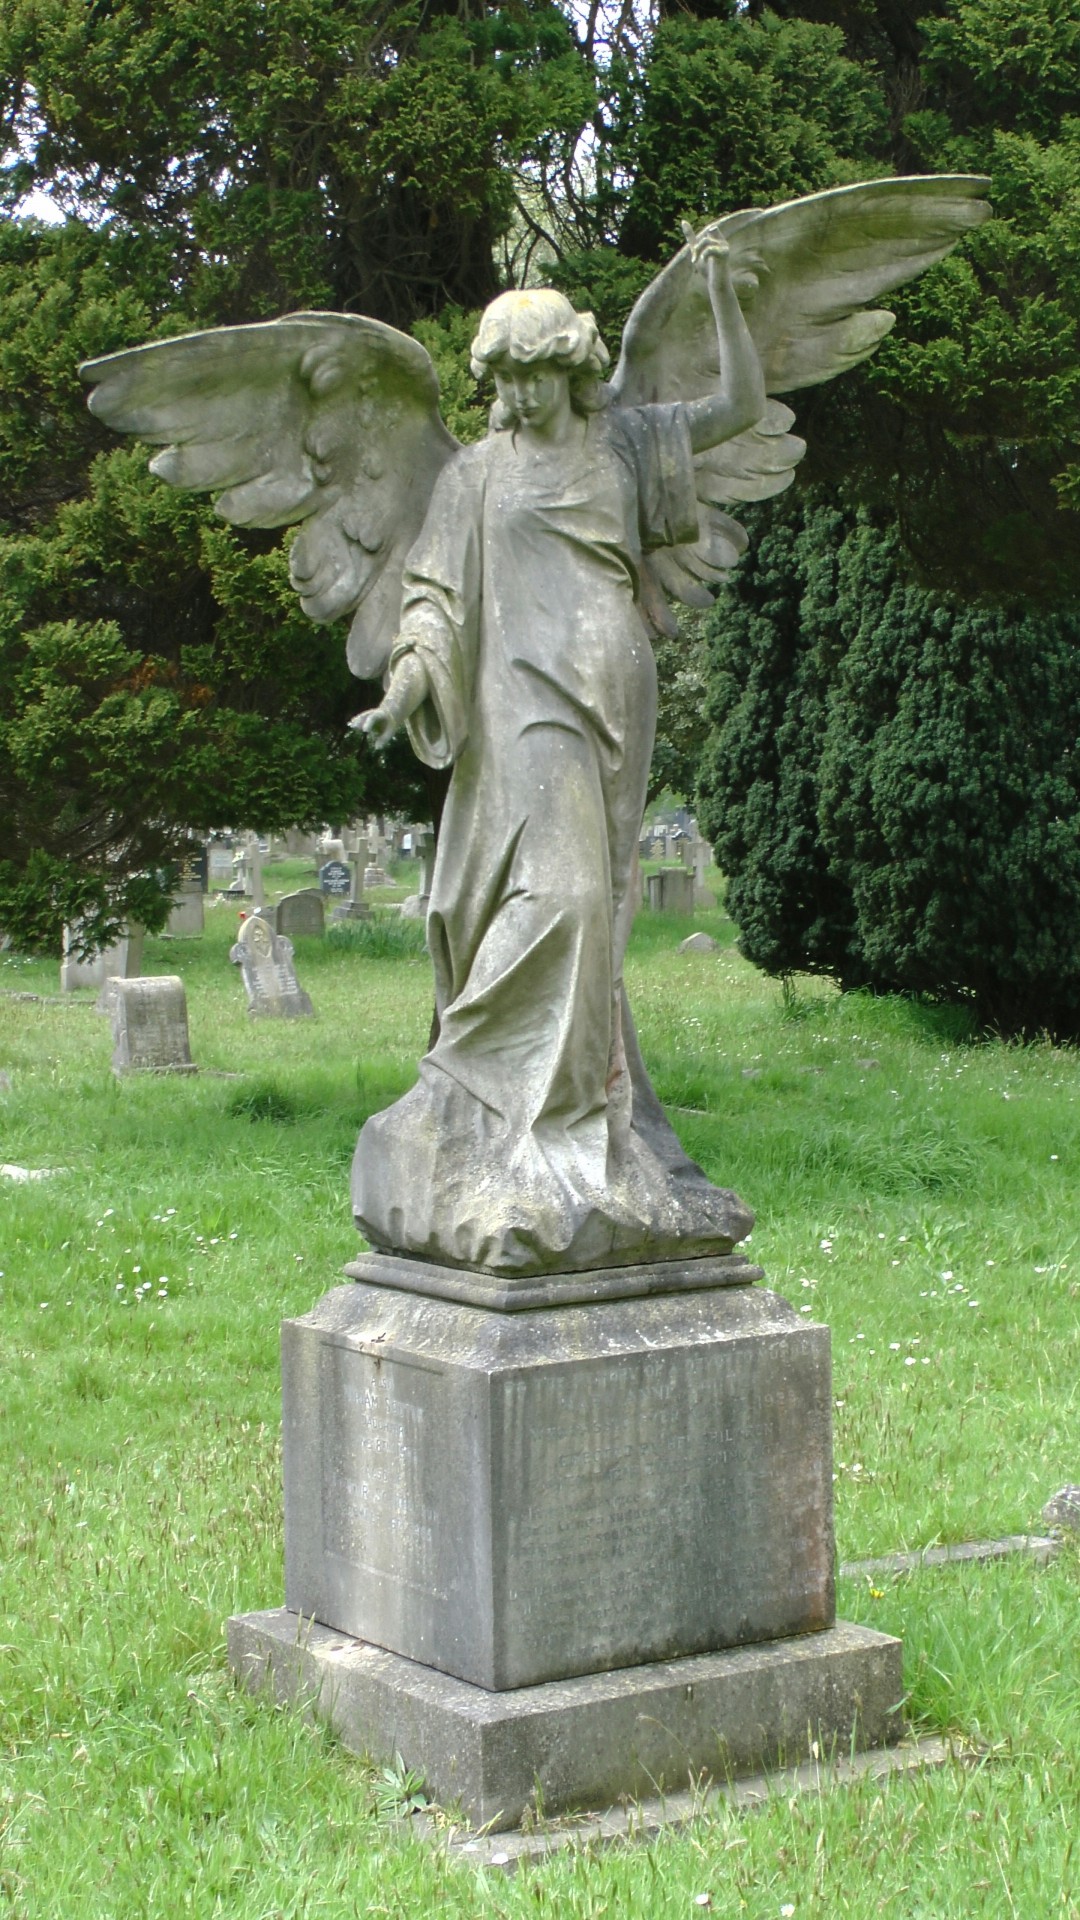 Headless Cemetery Grave Statue Stock Image - Image of 